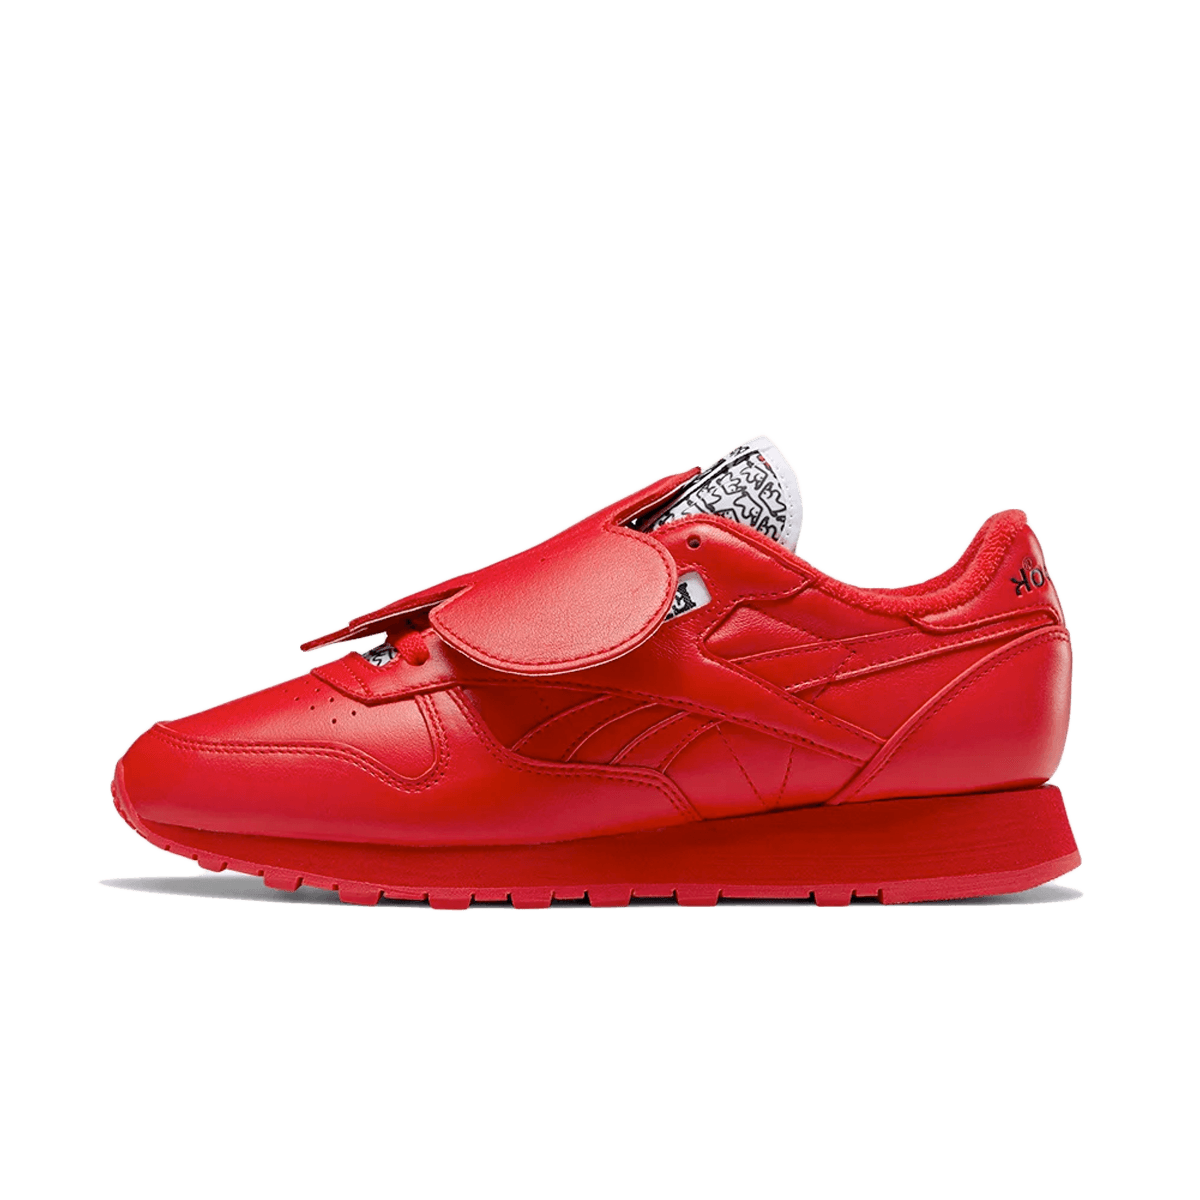 Eames x Reebok Classic Leather 'Vector Red'